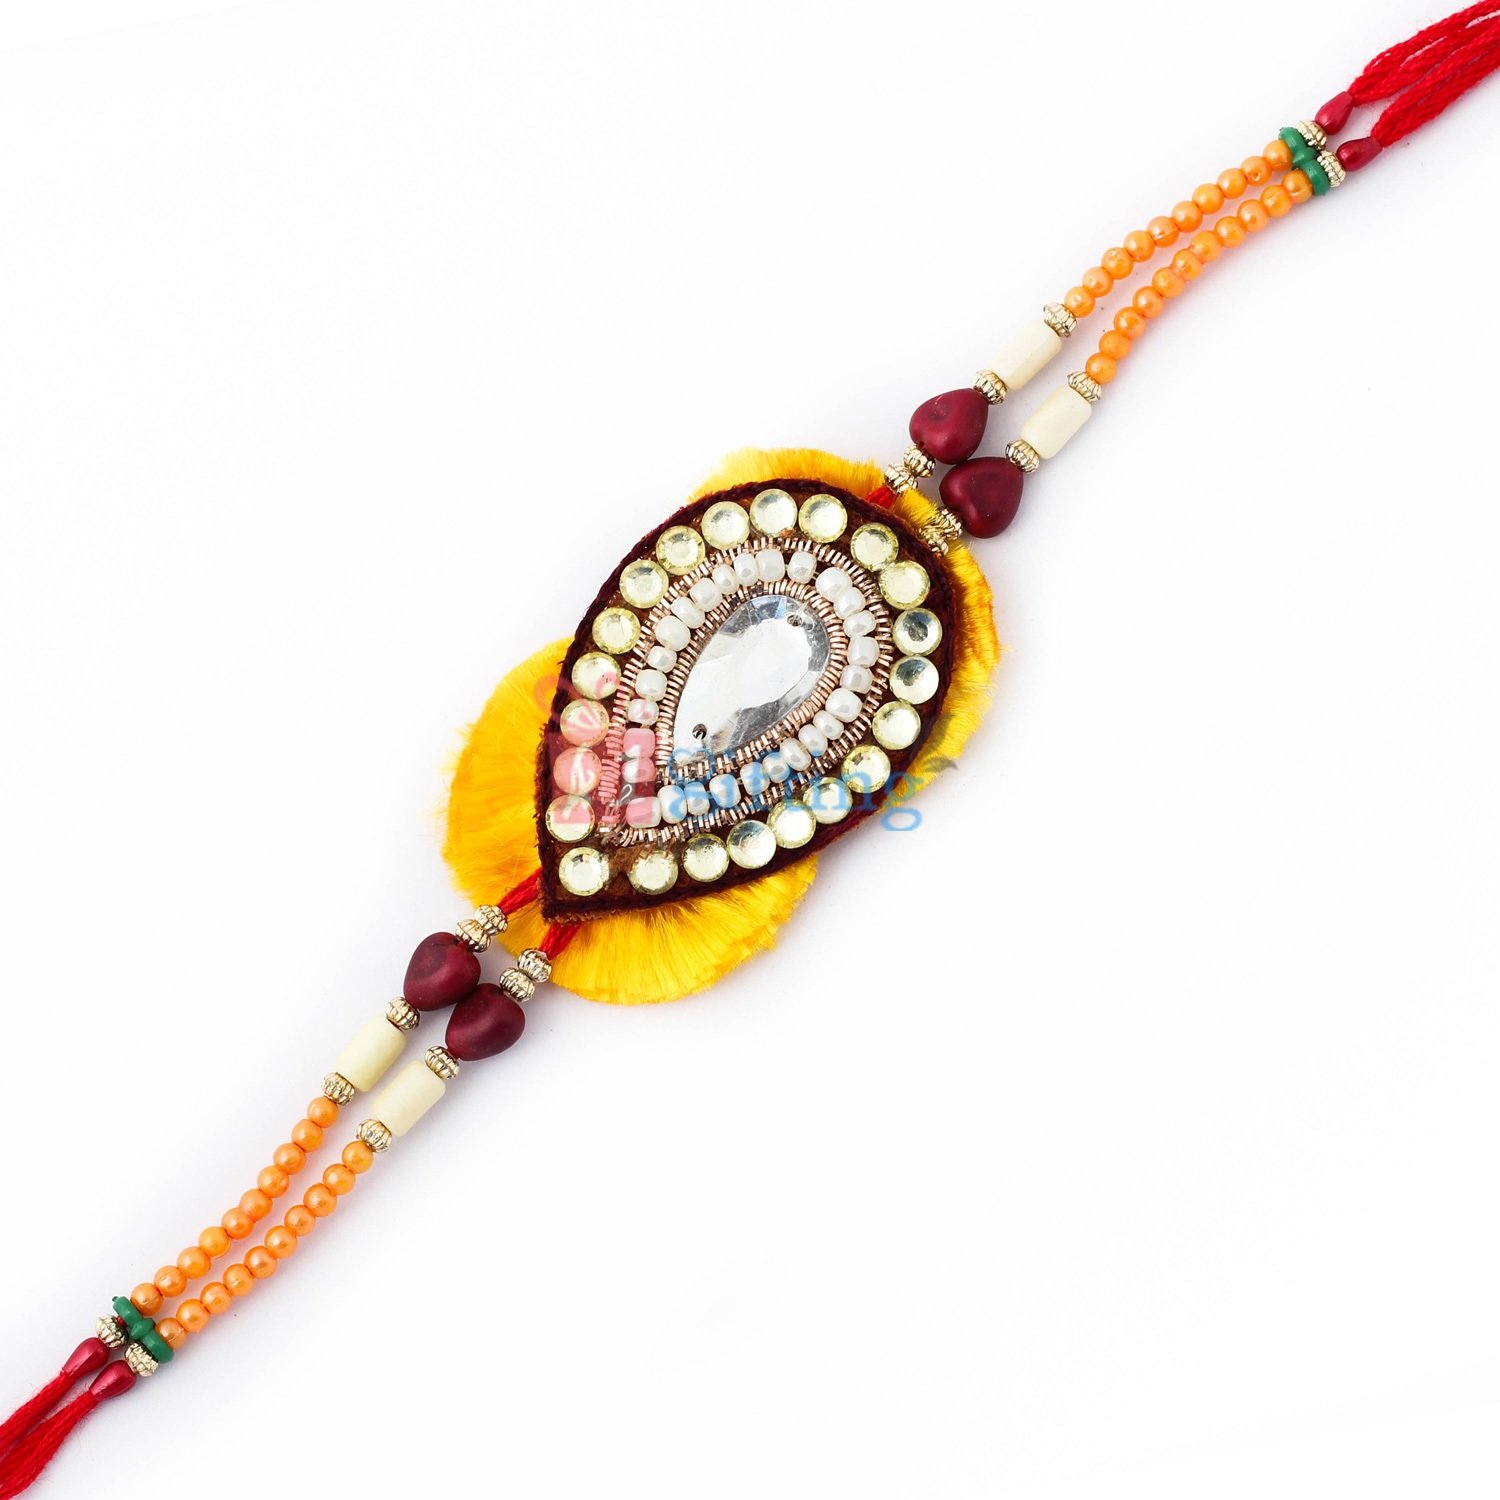 Emerge of crystals- all types of crystals with mauli Rakhi